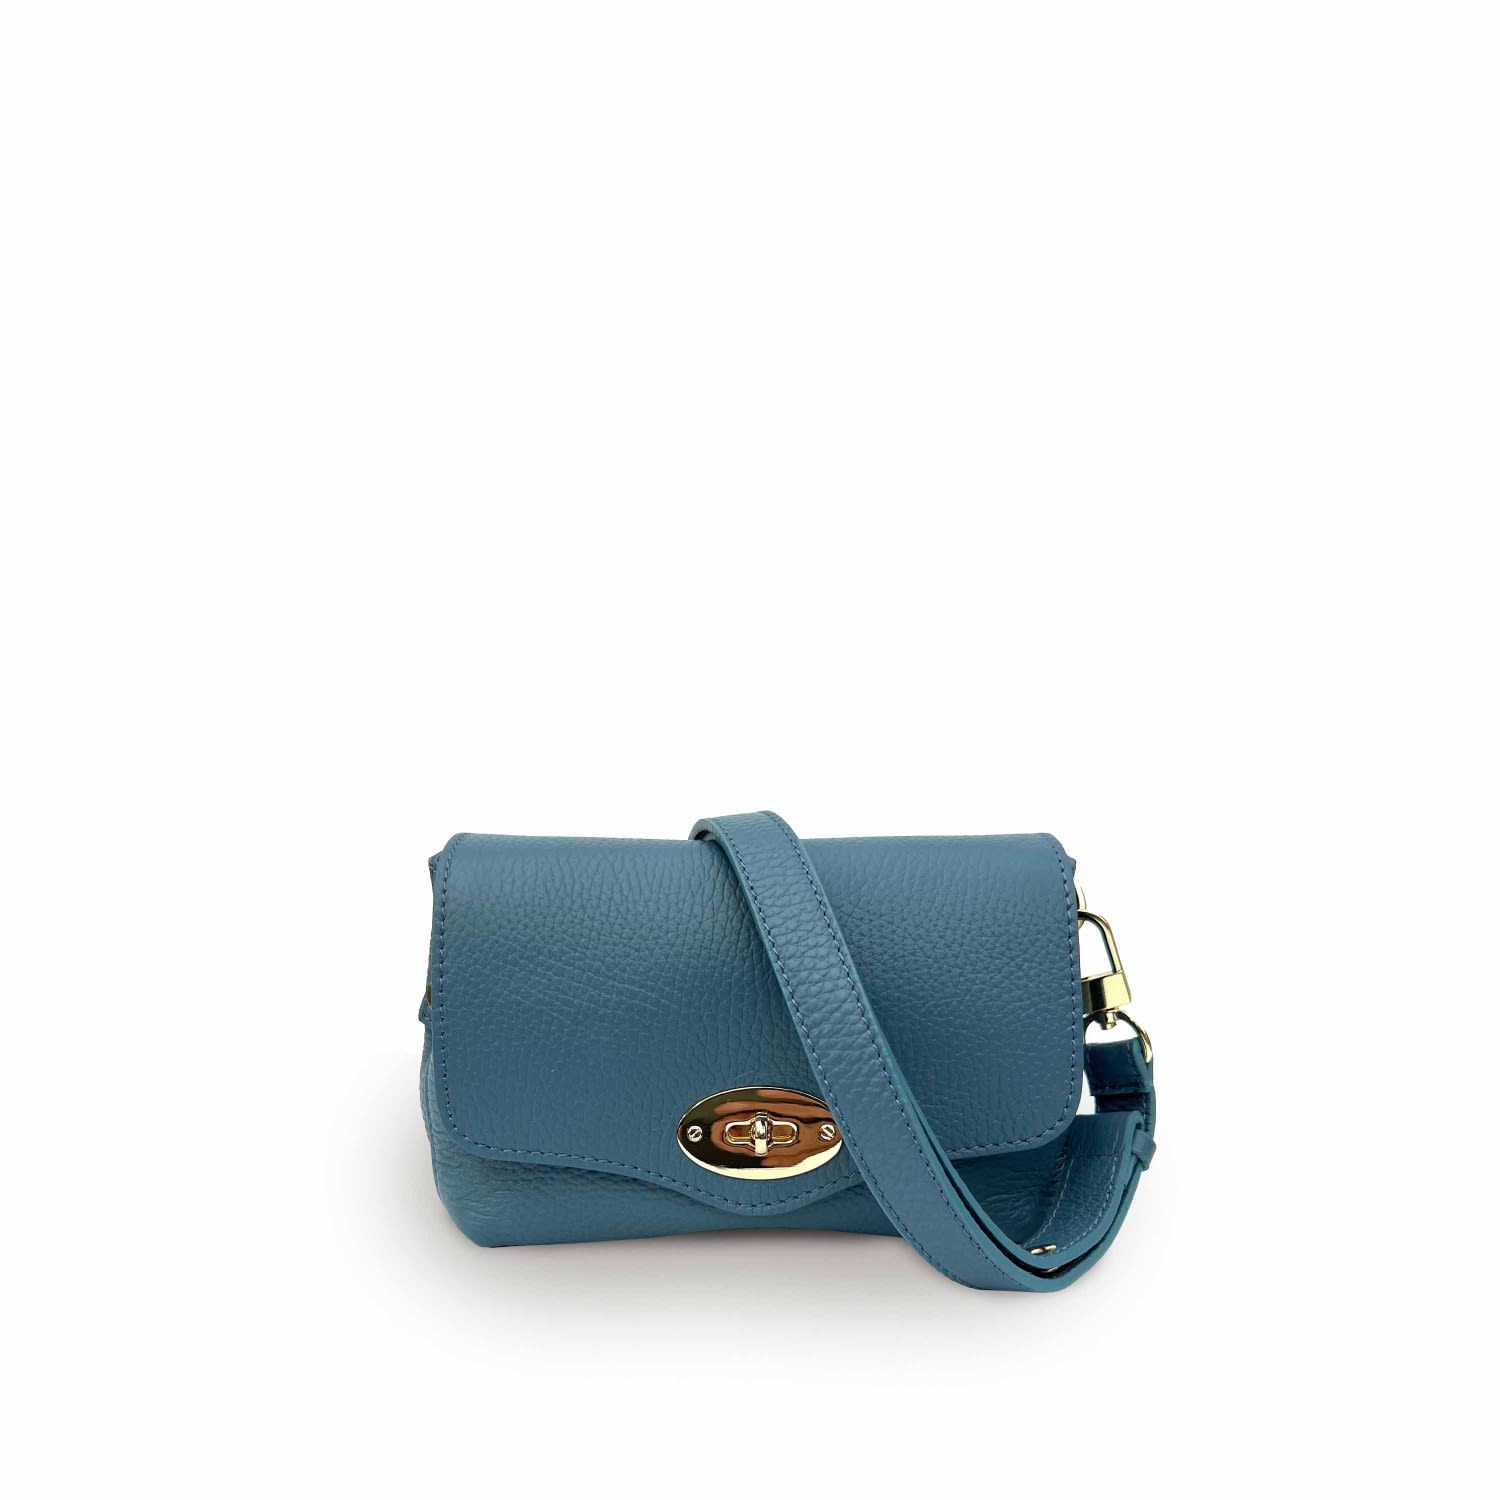 Apatchy London Women's Blue The Maddie Denim Leather Bag